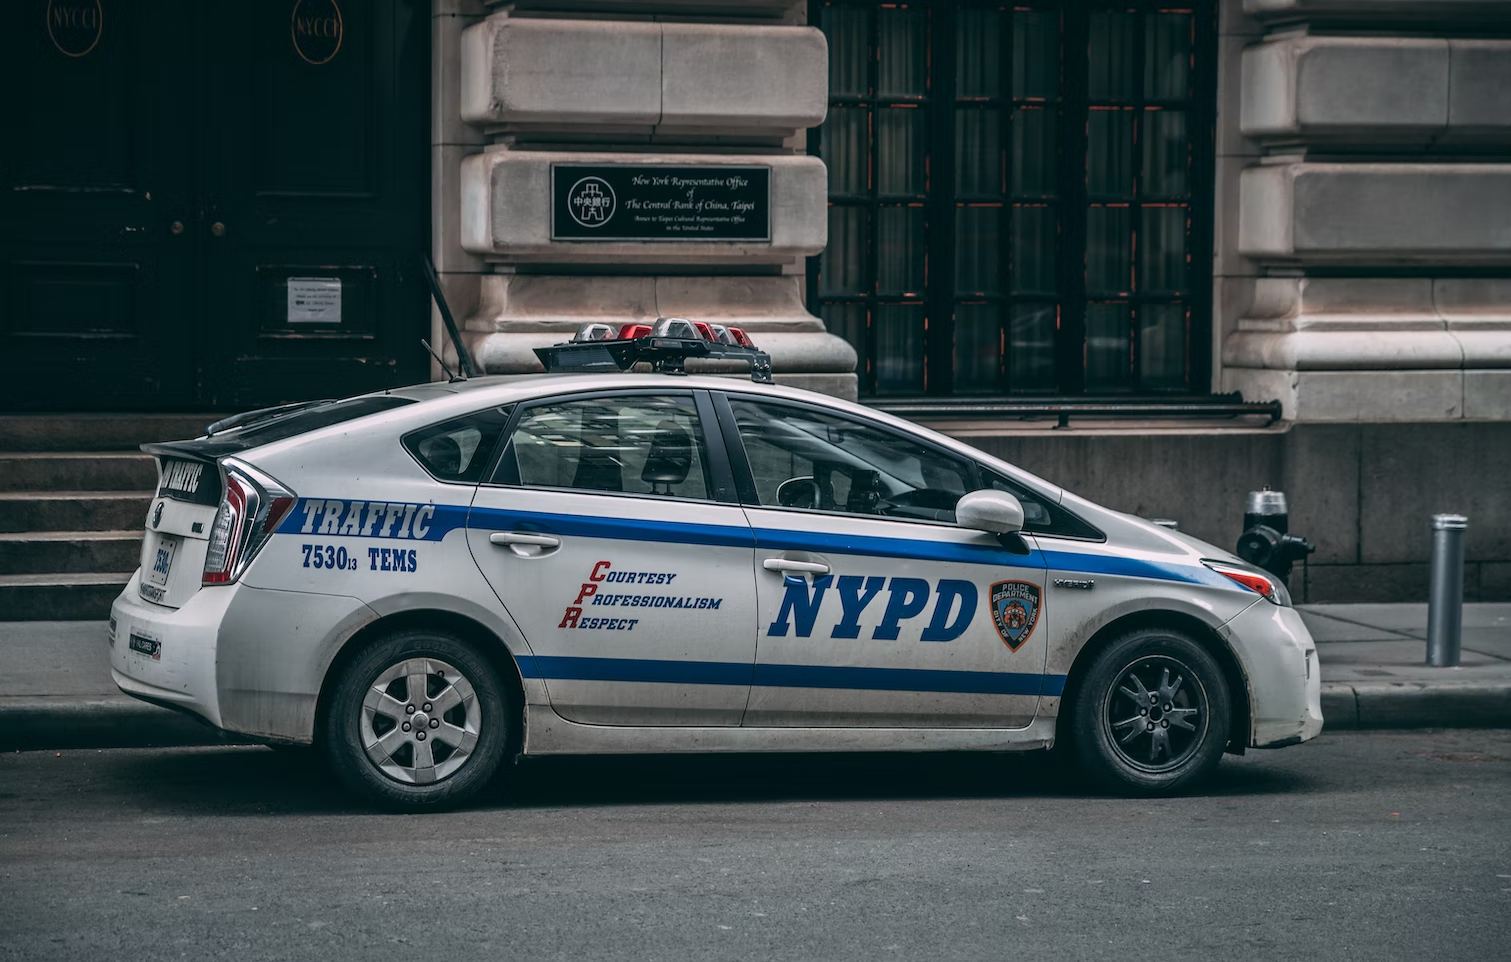 An NYPD vehicle